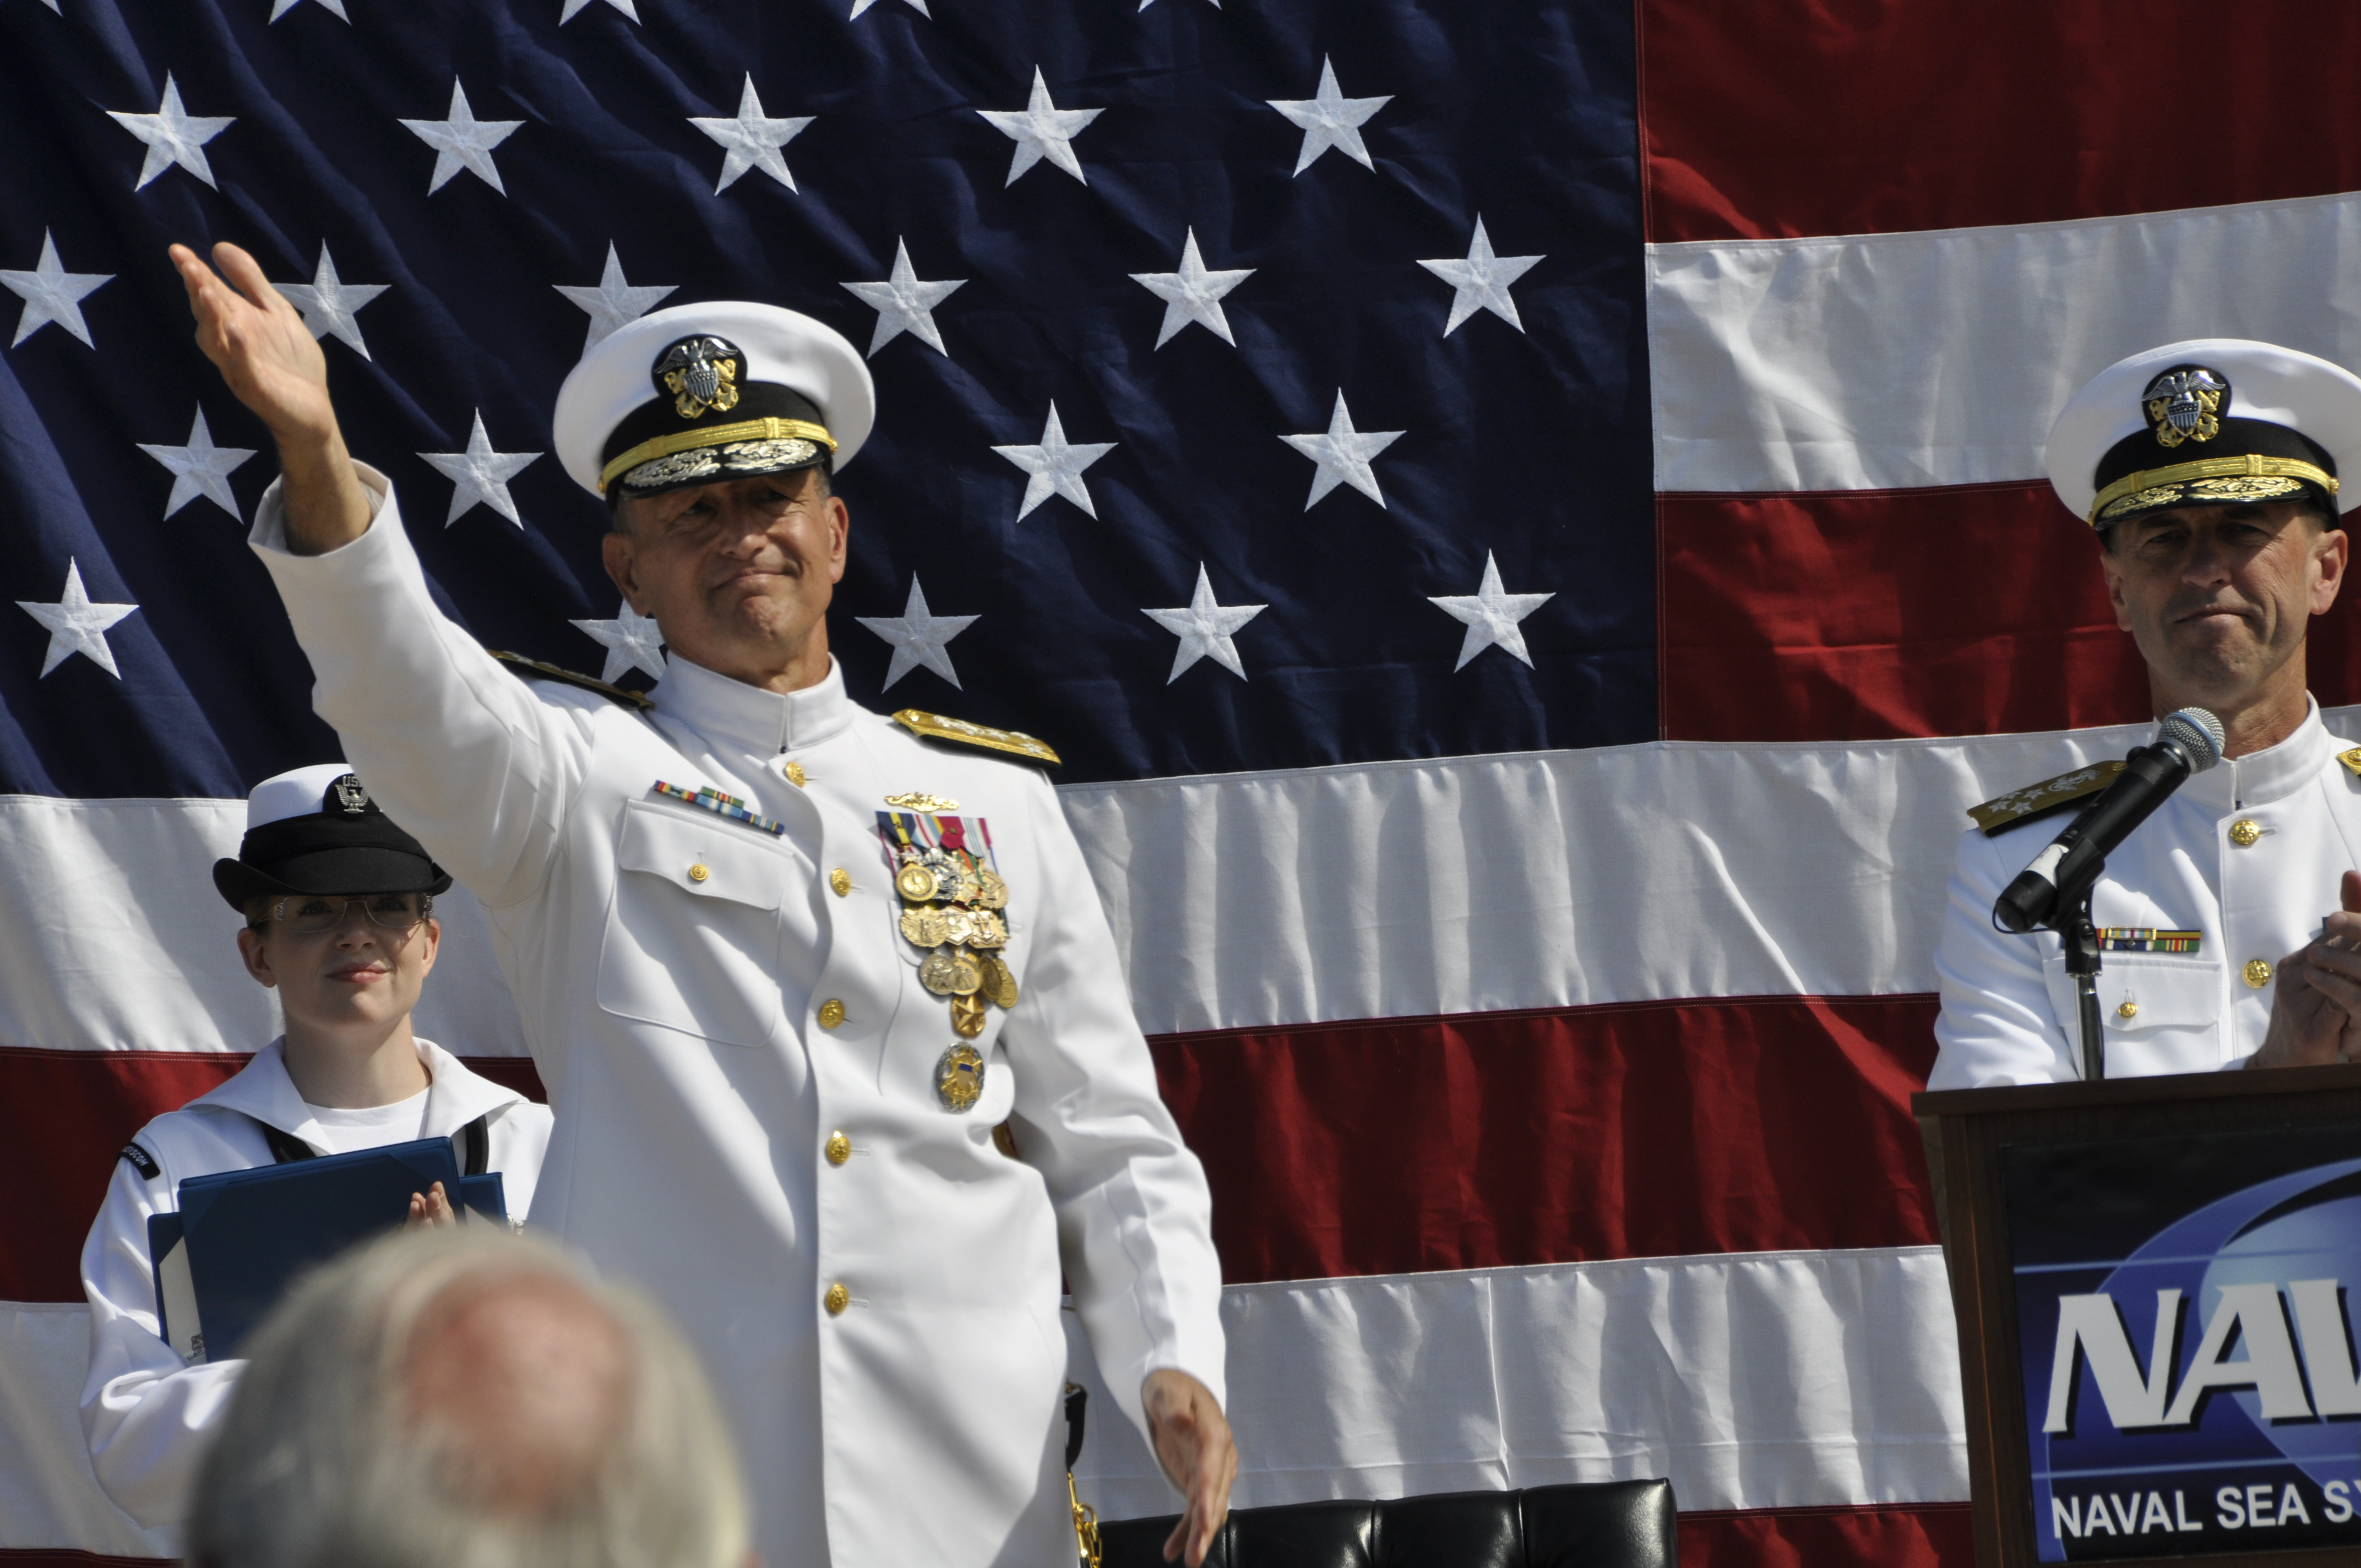 Vice Adm. William Hilarides, outgoing commander of Naval Sea Systems Command (NAVSEA), waves to the crowd during a change of command ceremony today at the Washington Navy Yard. Hilarides retired from the Navy after 39 years of service. US Navy photo.